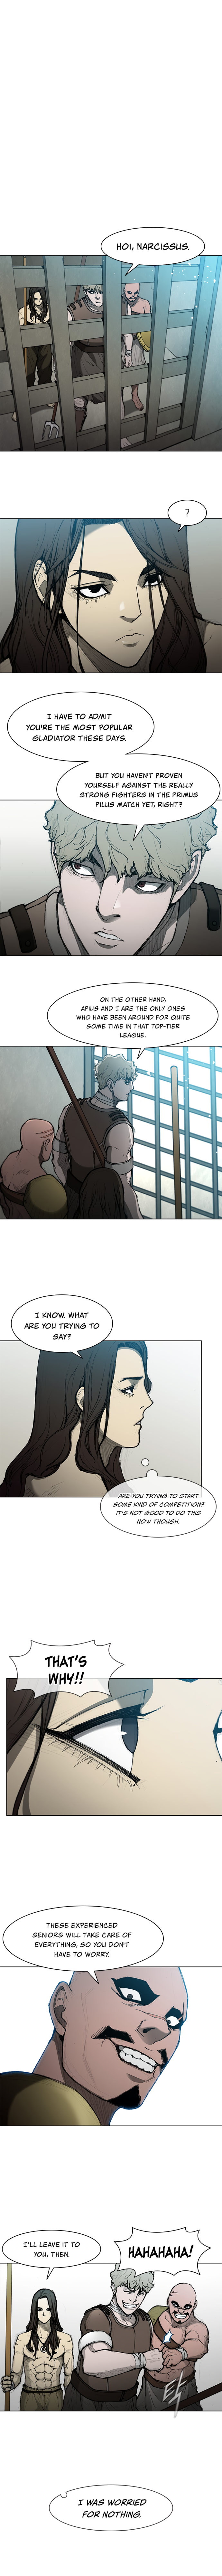 Long Way of the Warrior - Chapter 42 Page 2